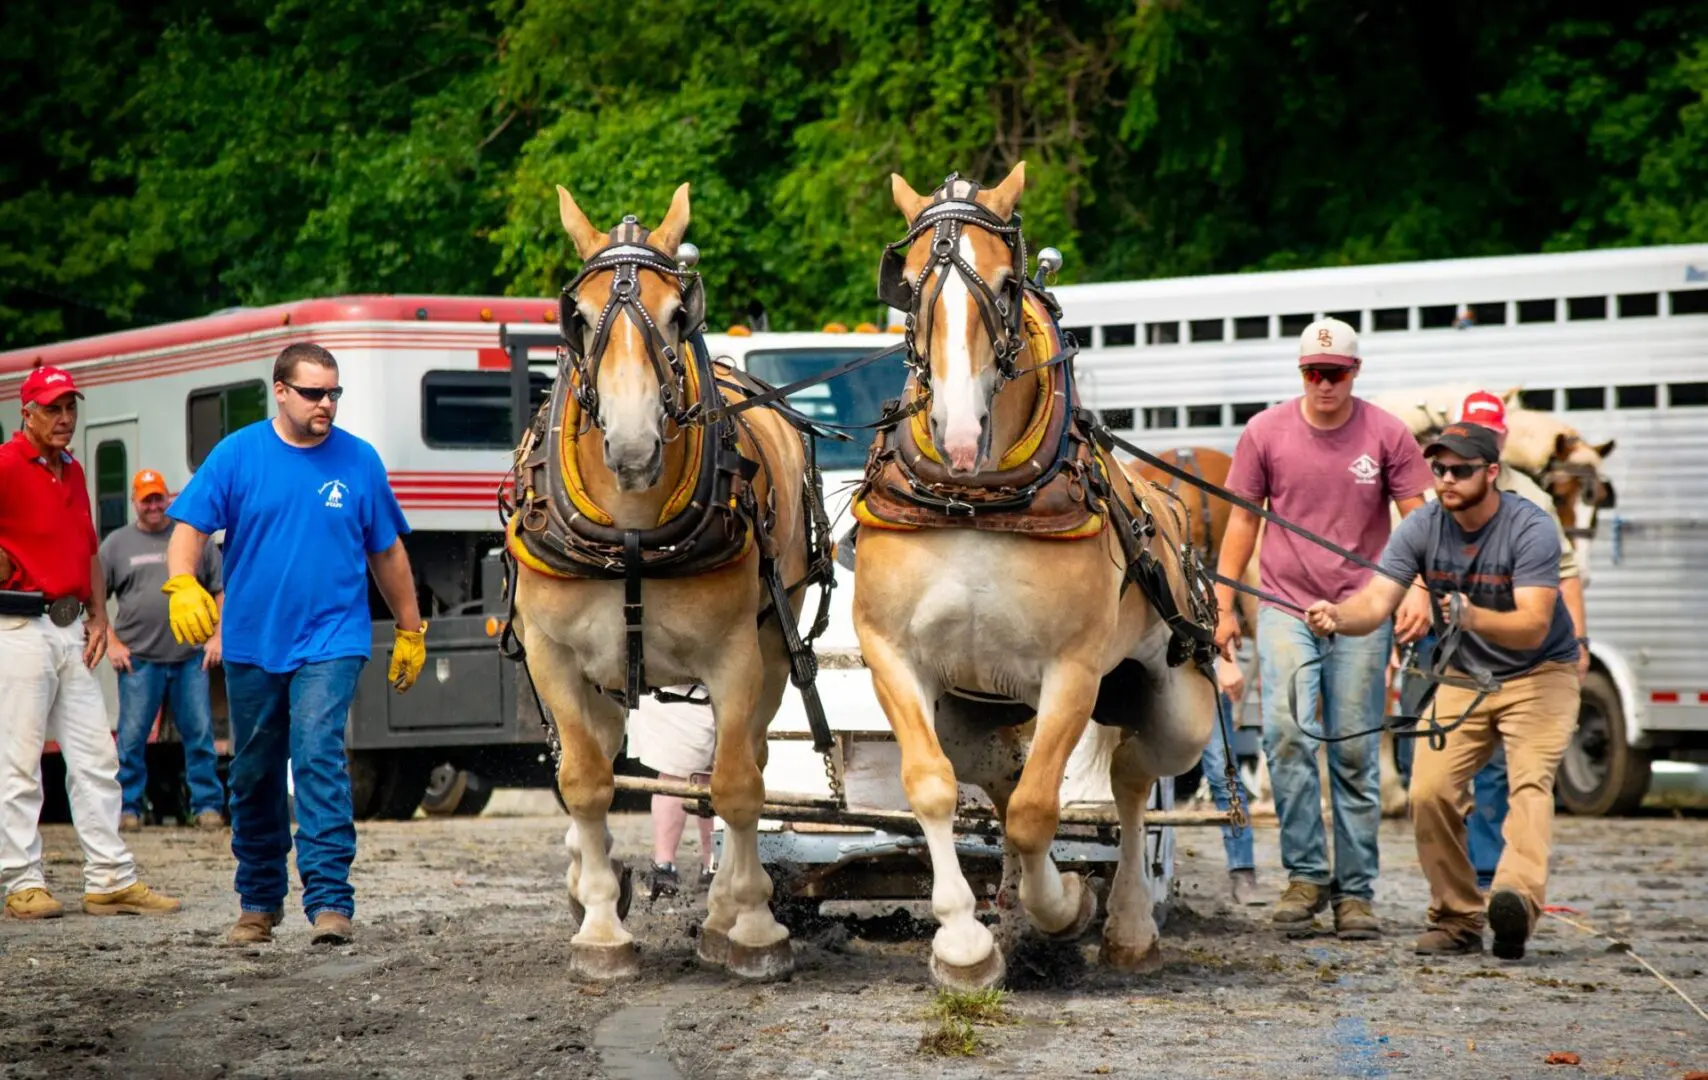 Two horses tied to a cart in front of trailer